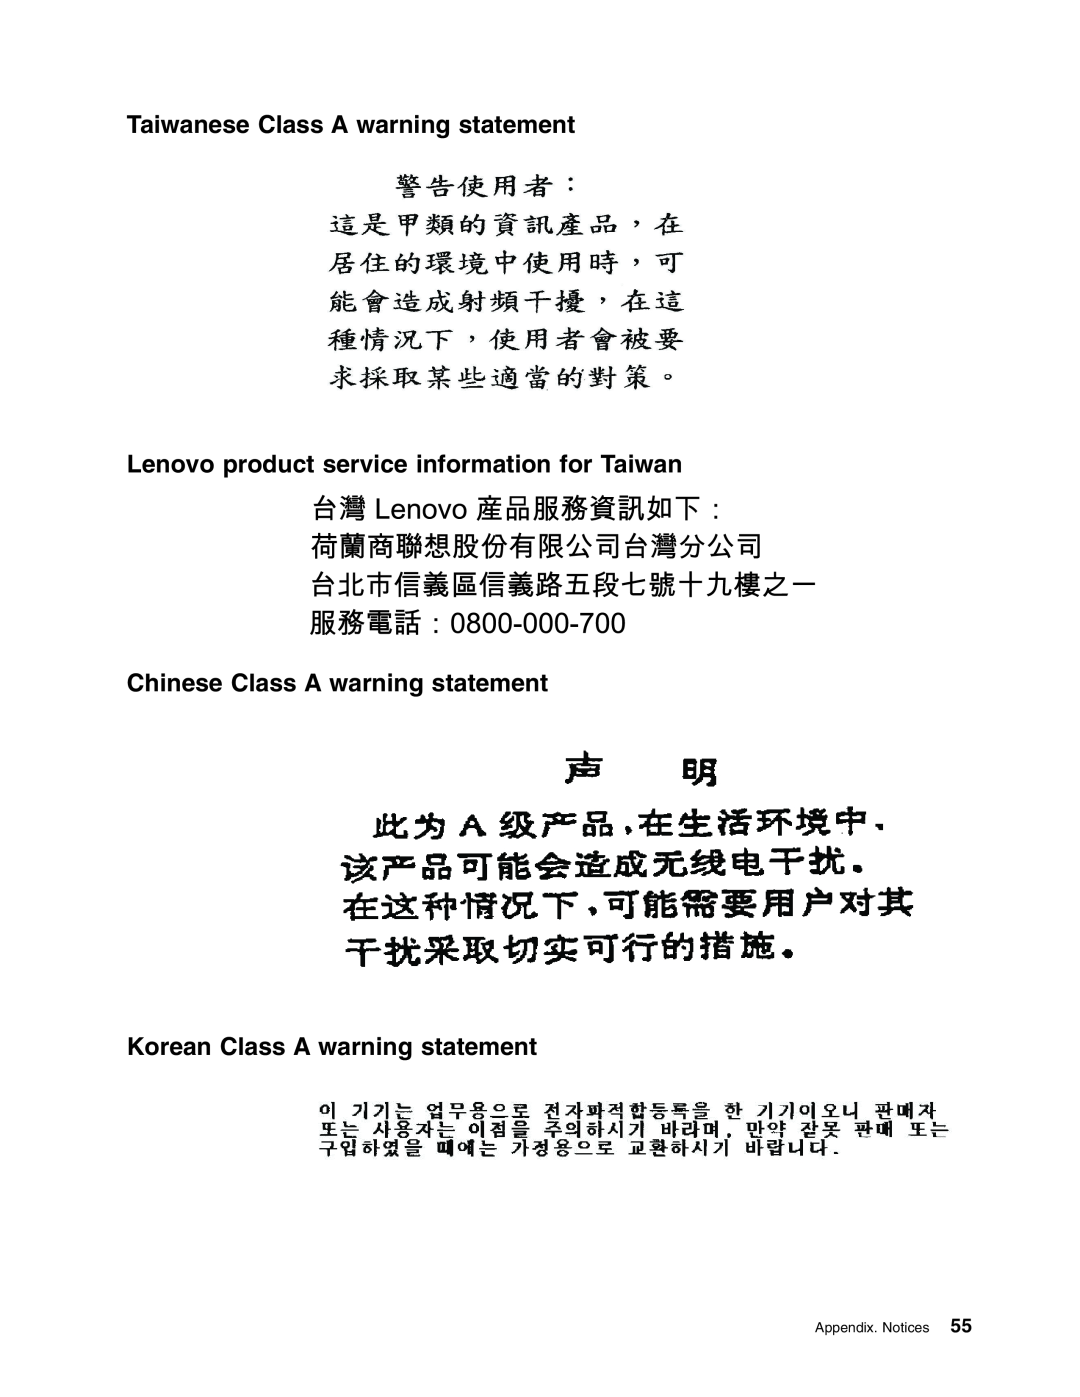 Lenovo 6437, 6438 Taiwanese Class A warning statement, Lenovo product service information for Taiwan, Appendix. Notices 